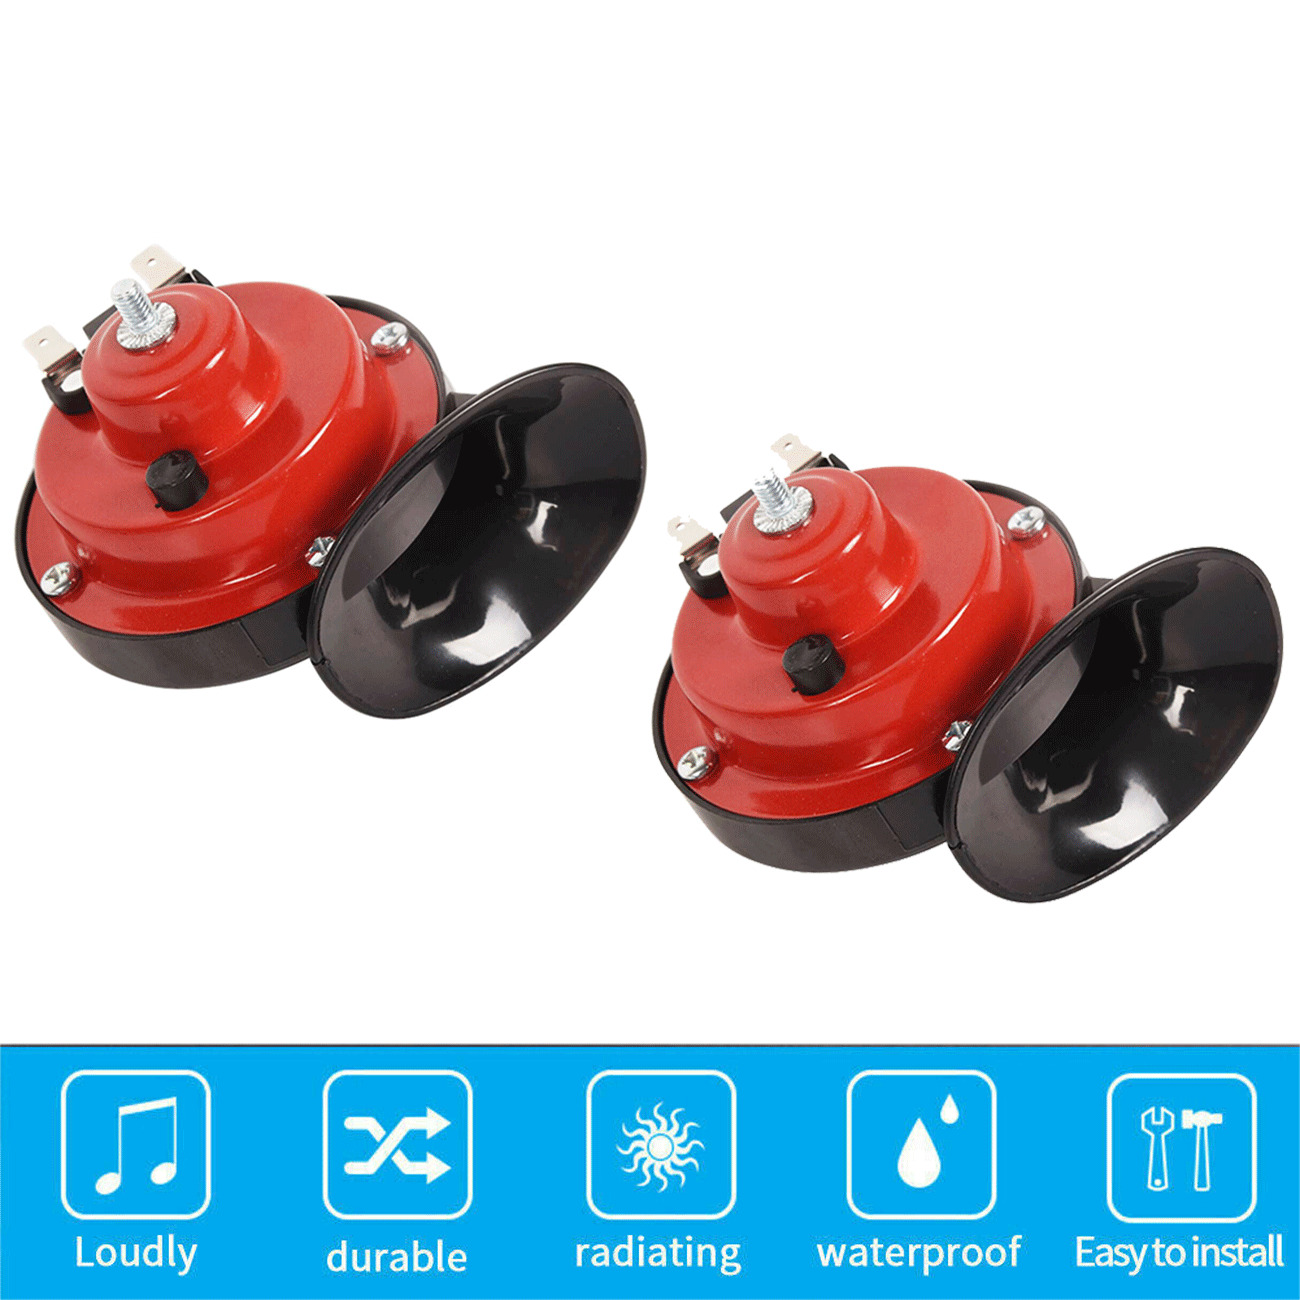 2x 300DB For Trucks Super Train Horn Car Boat Motorcycle Electric Air Horn 12V